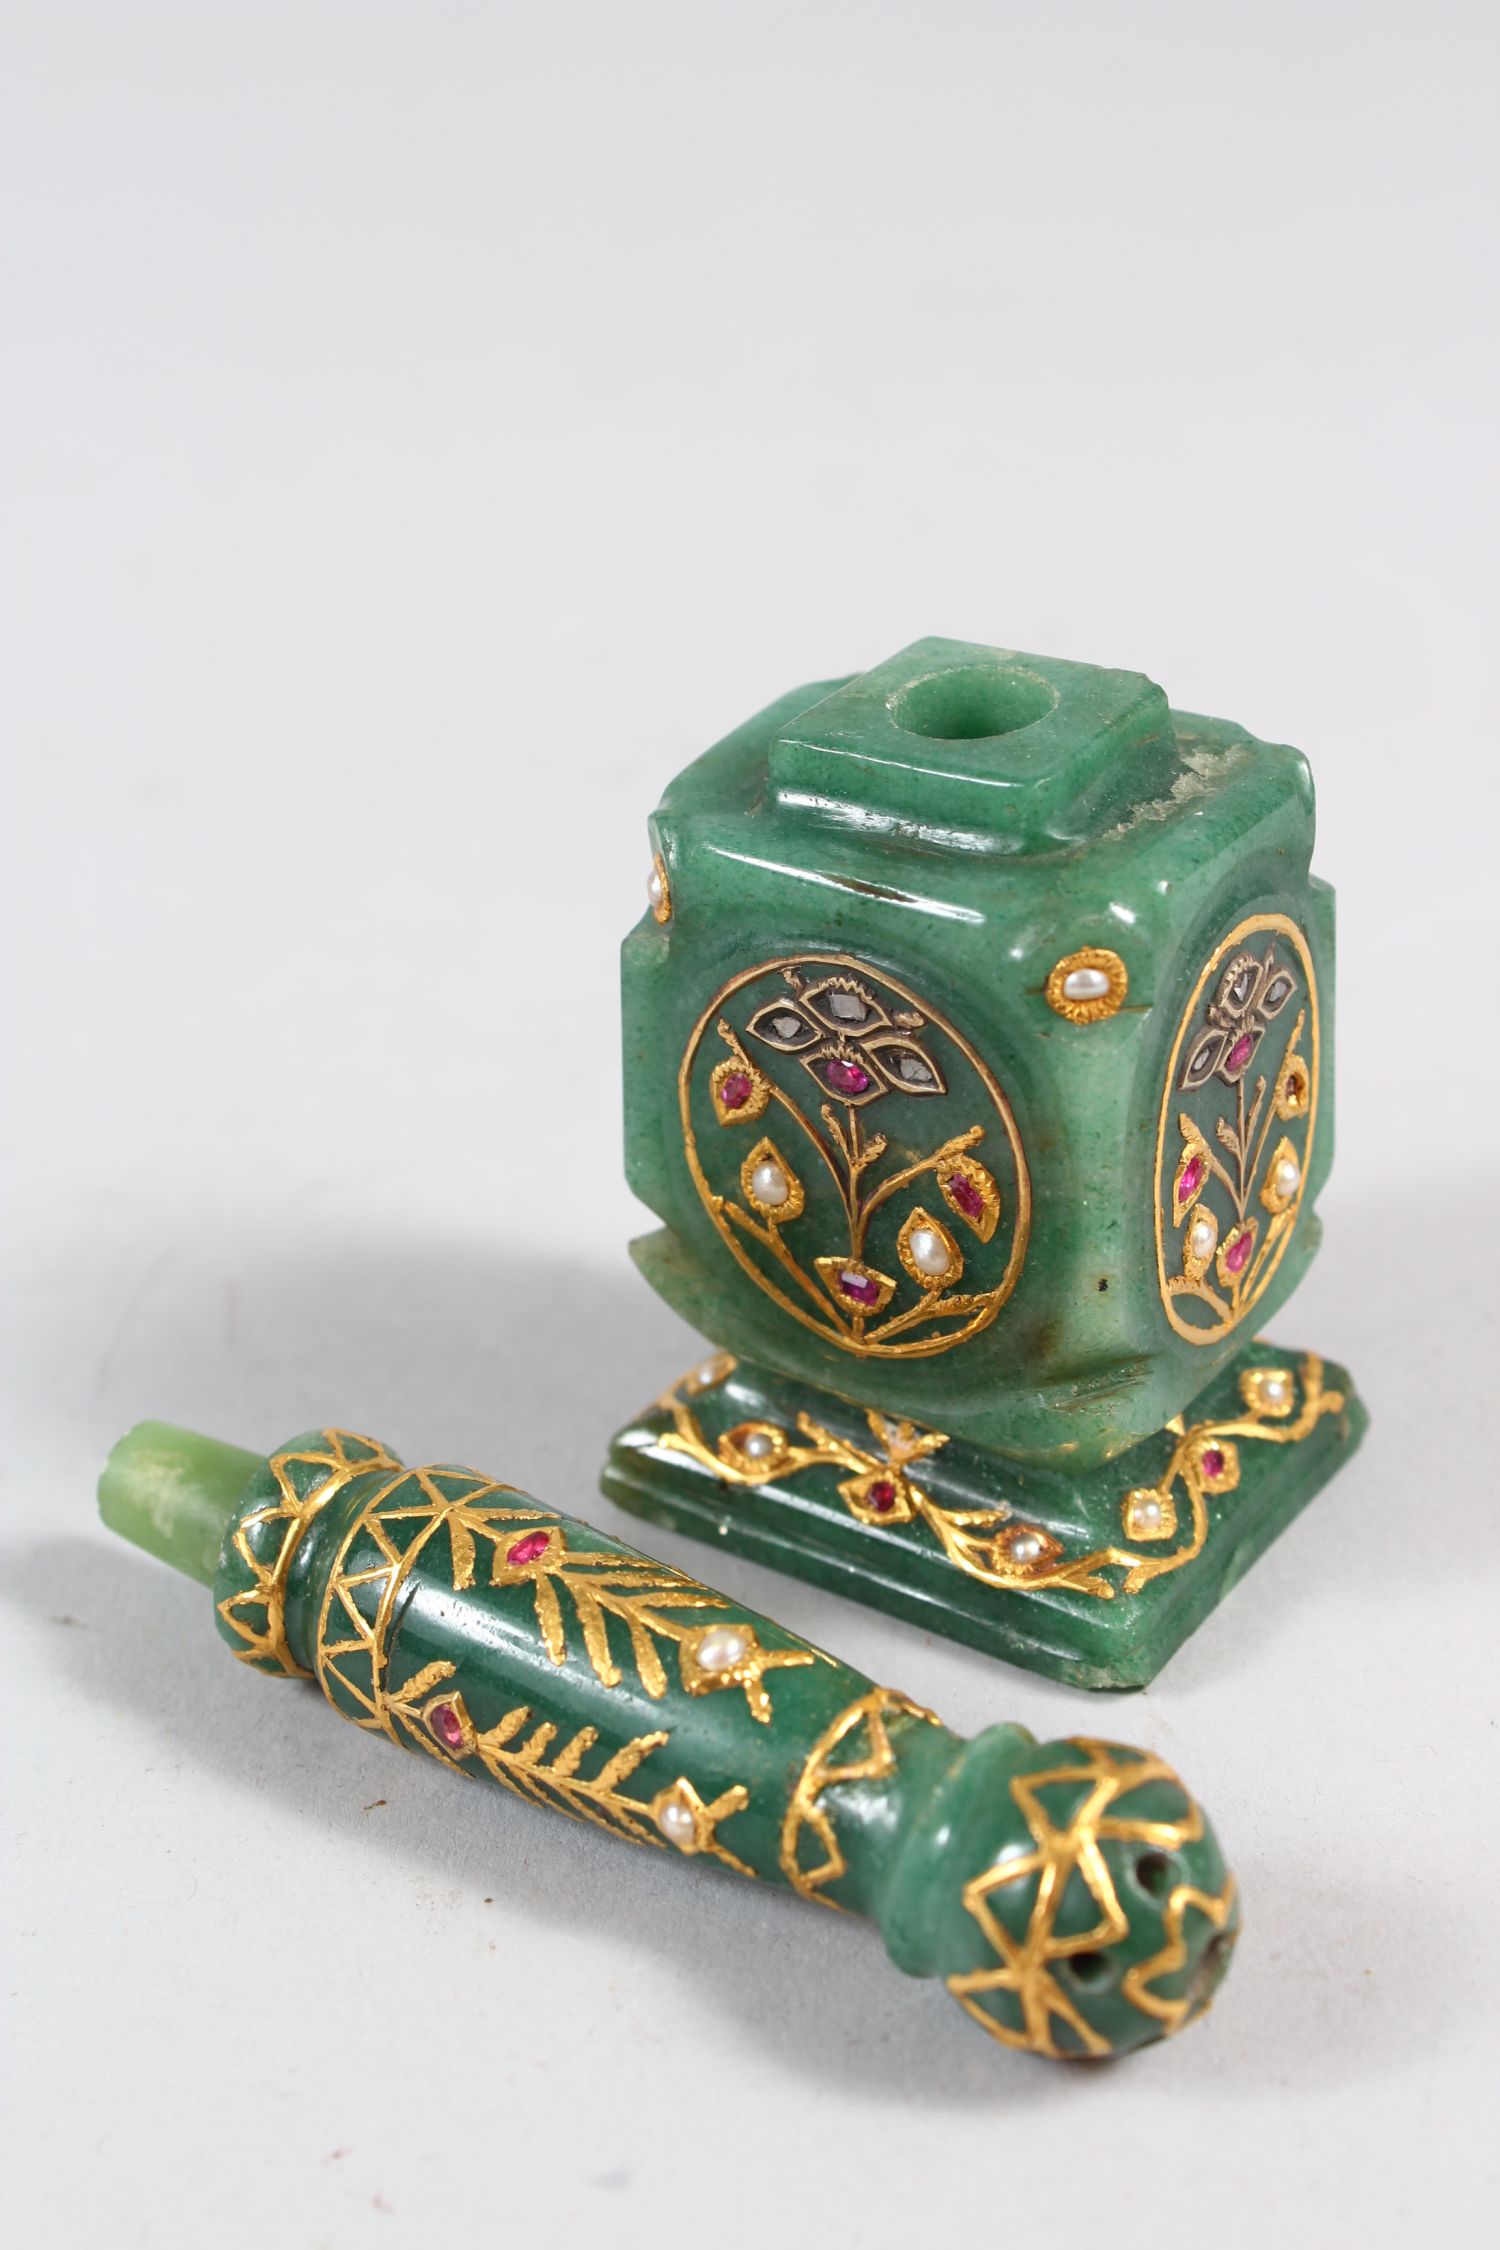 A SMALL LATE 19TH-EARLY 20TH CENTURY INDIAN JEWEL SET GOLD INLAID JADE PERFUME BOTTLE, 42cm high. - Image 4 of 6